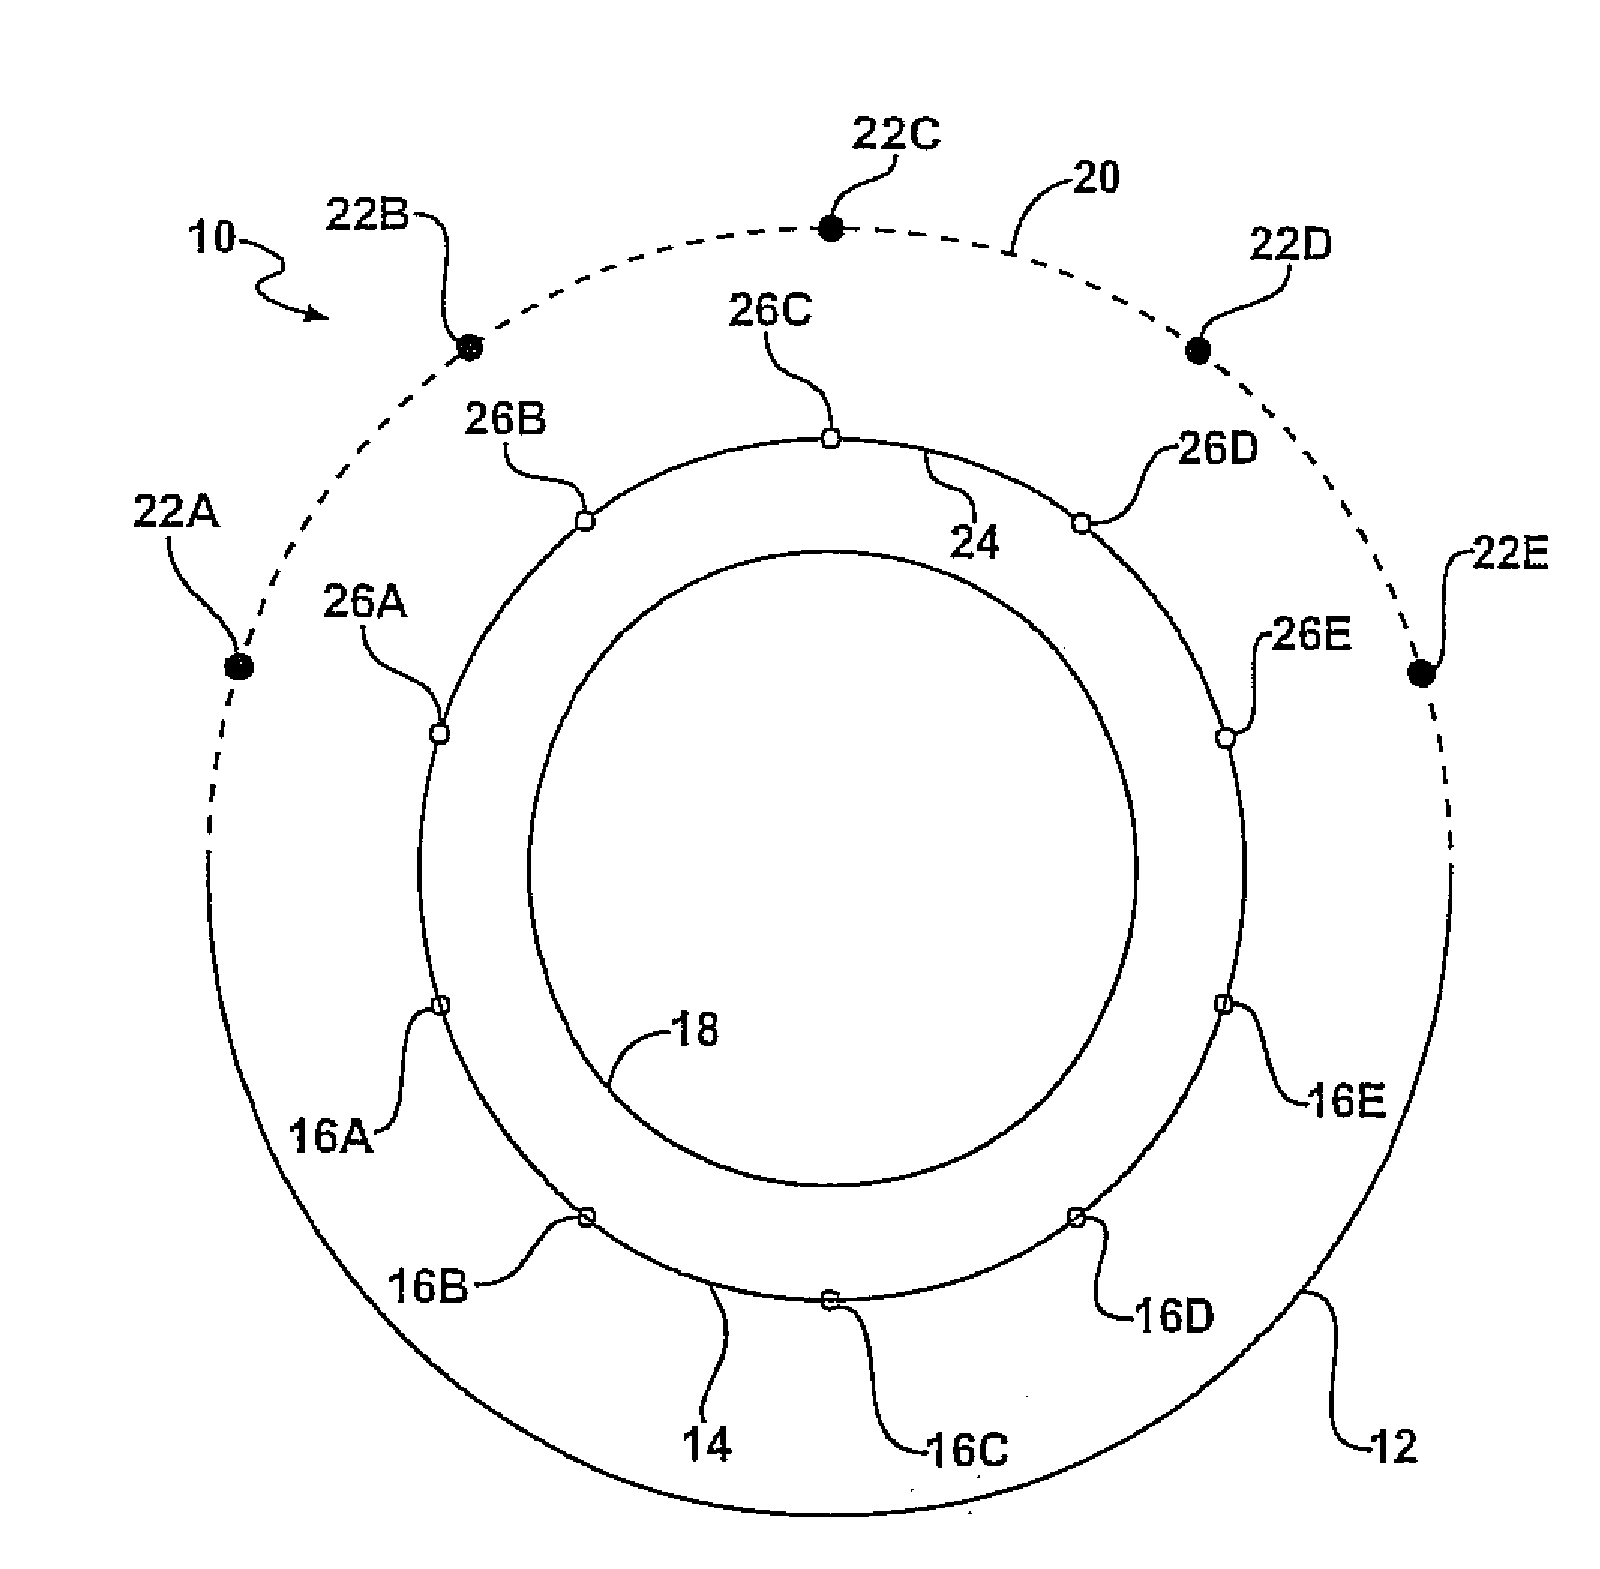 Nuclear medical imaging device